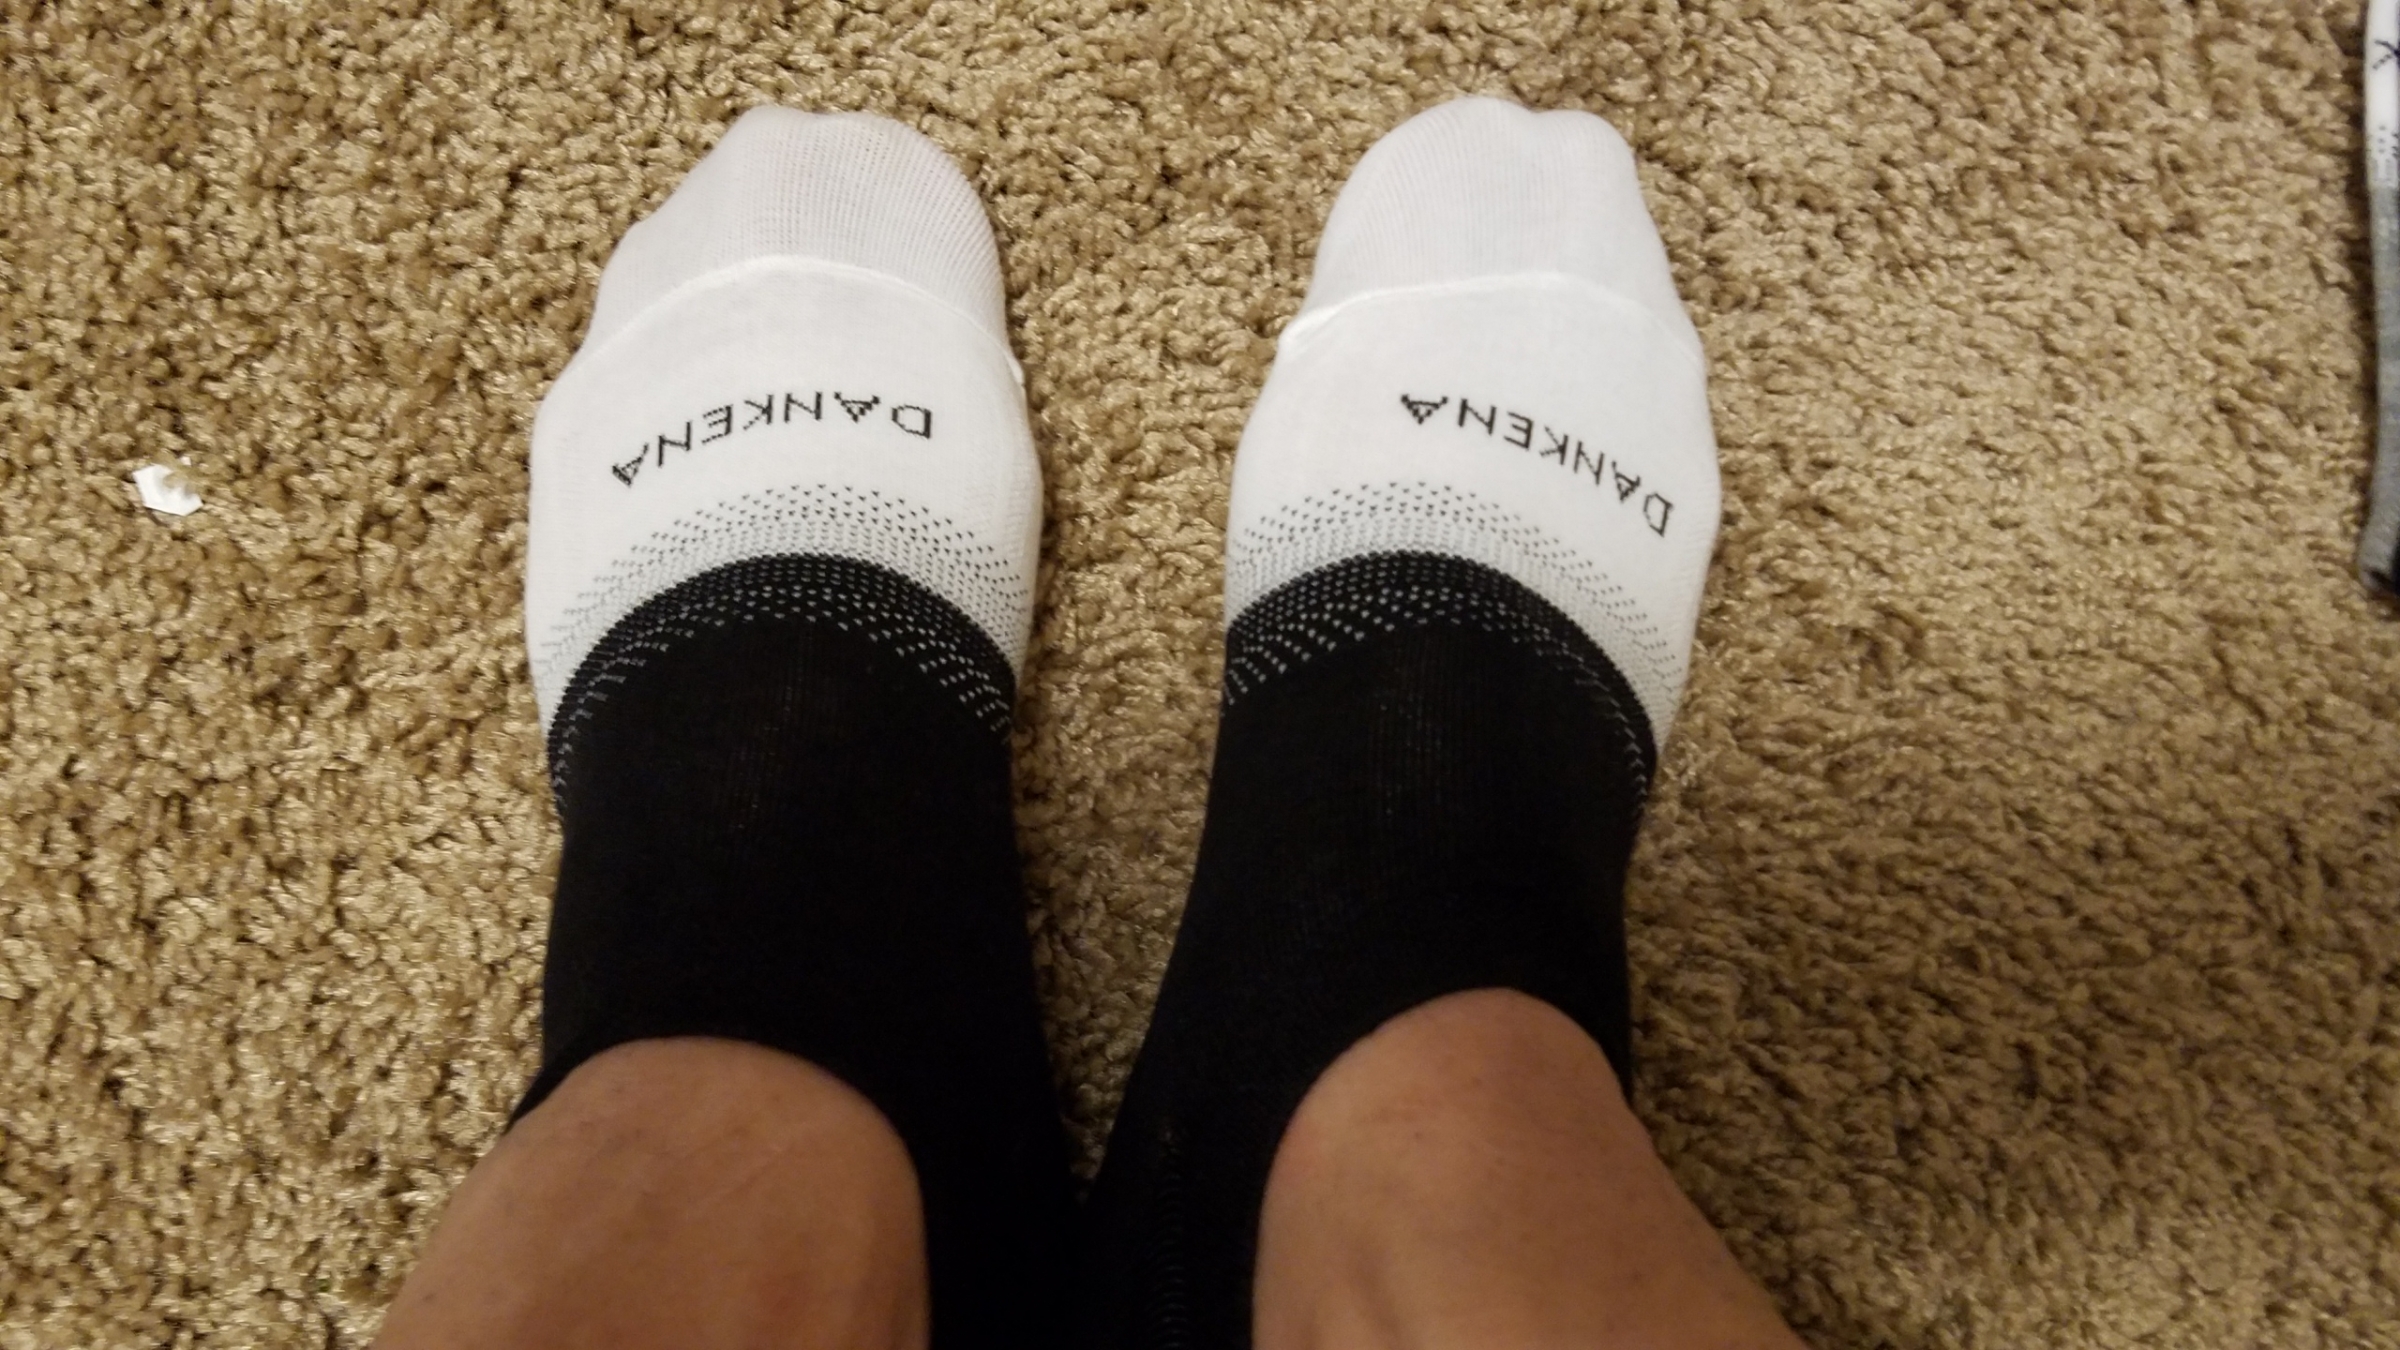 Just the way I love my socks to fit and feel!